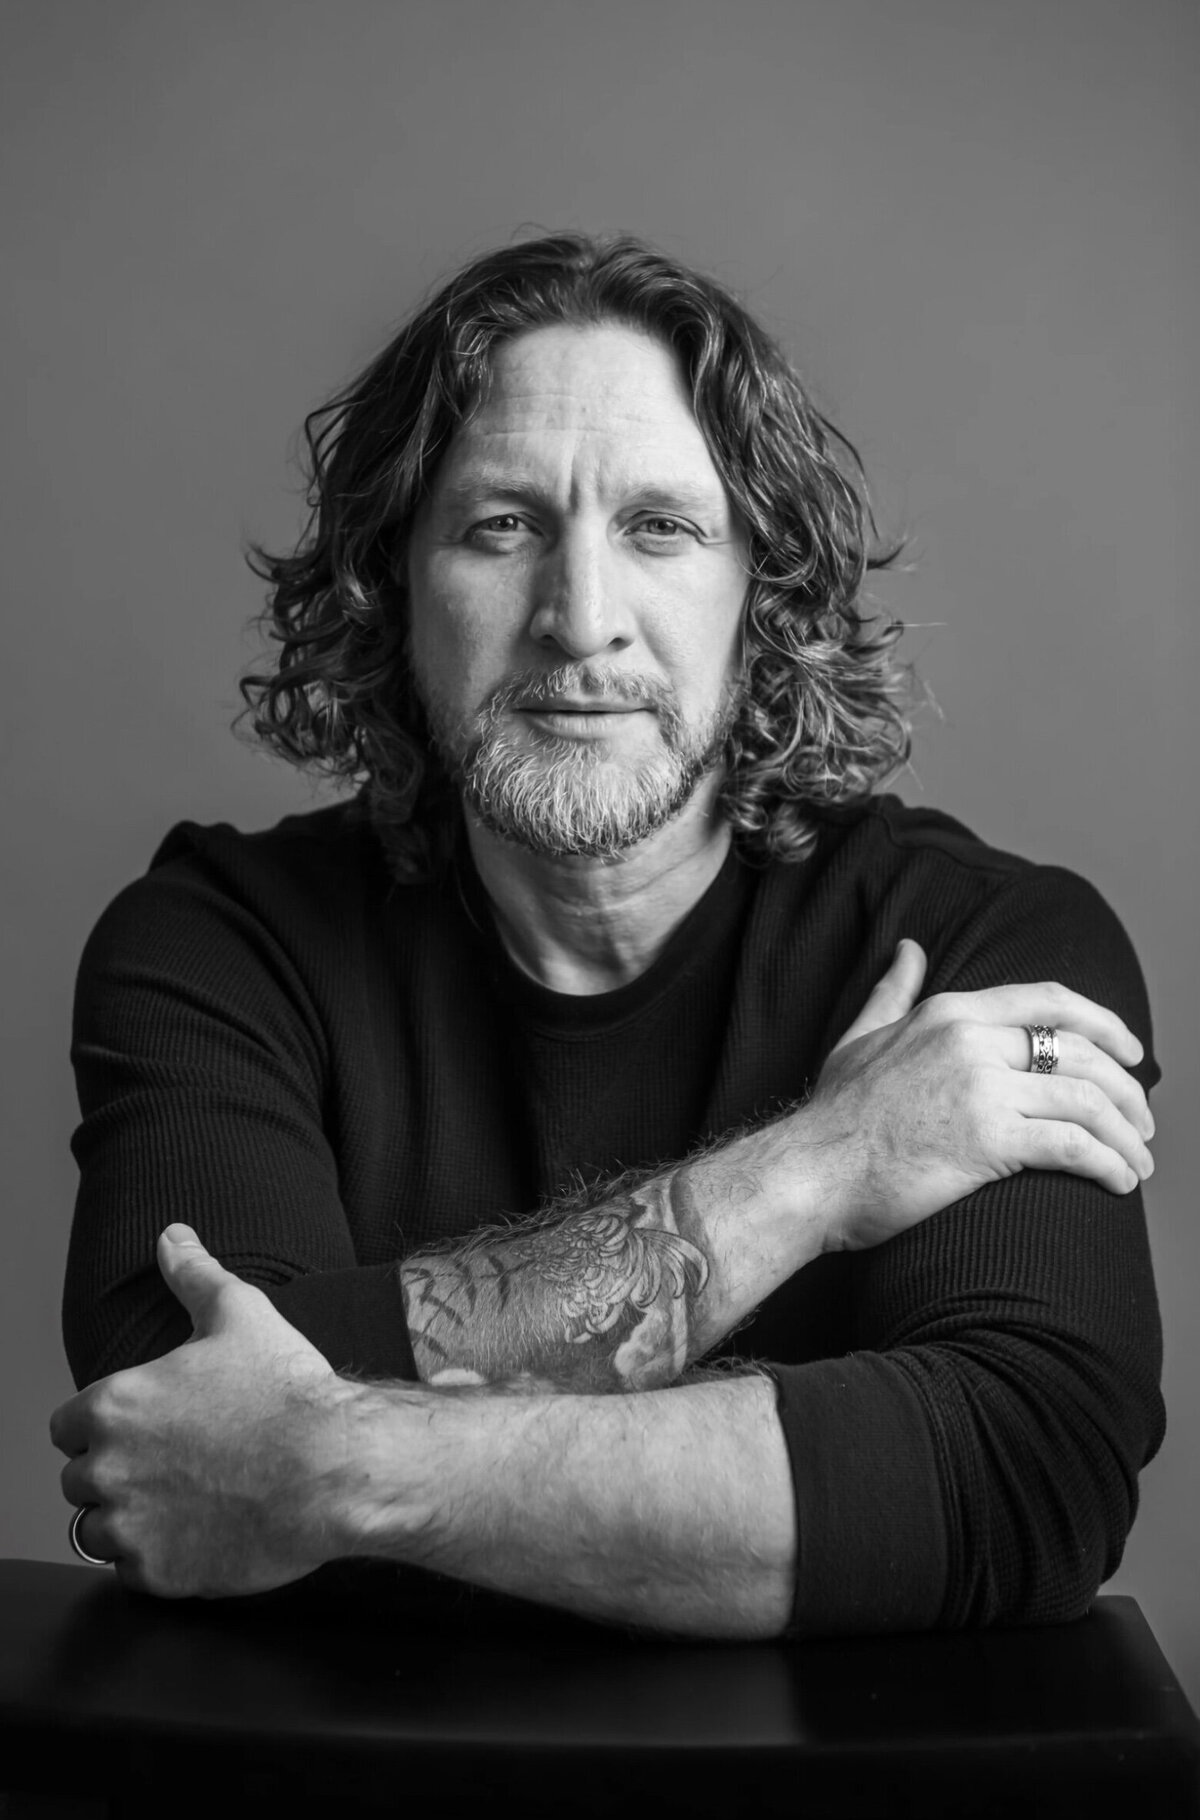 Man with curly hair and tattoos, posing for a headshot with his arms crossed